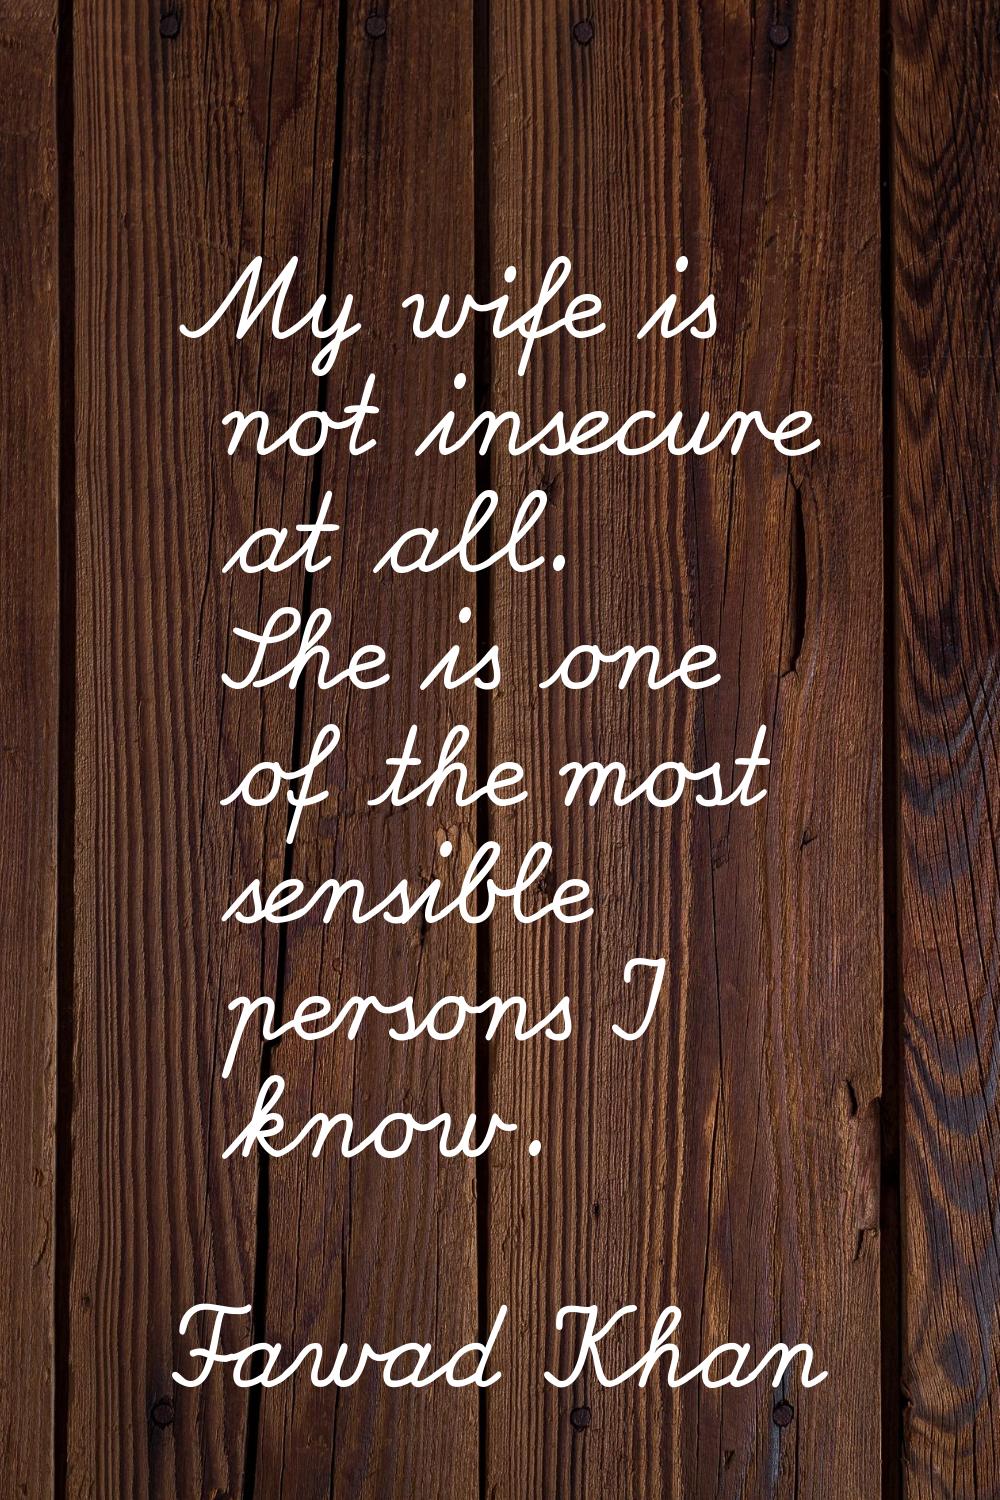 My wife is not insecure at all. She is one of the most sensible persons I know.